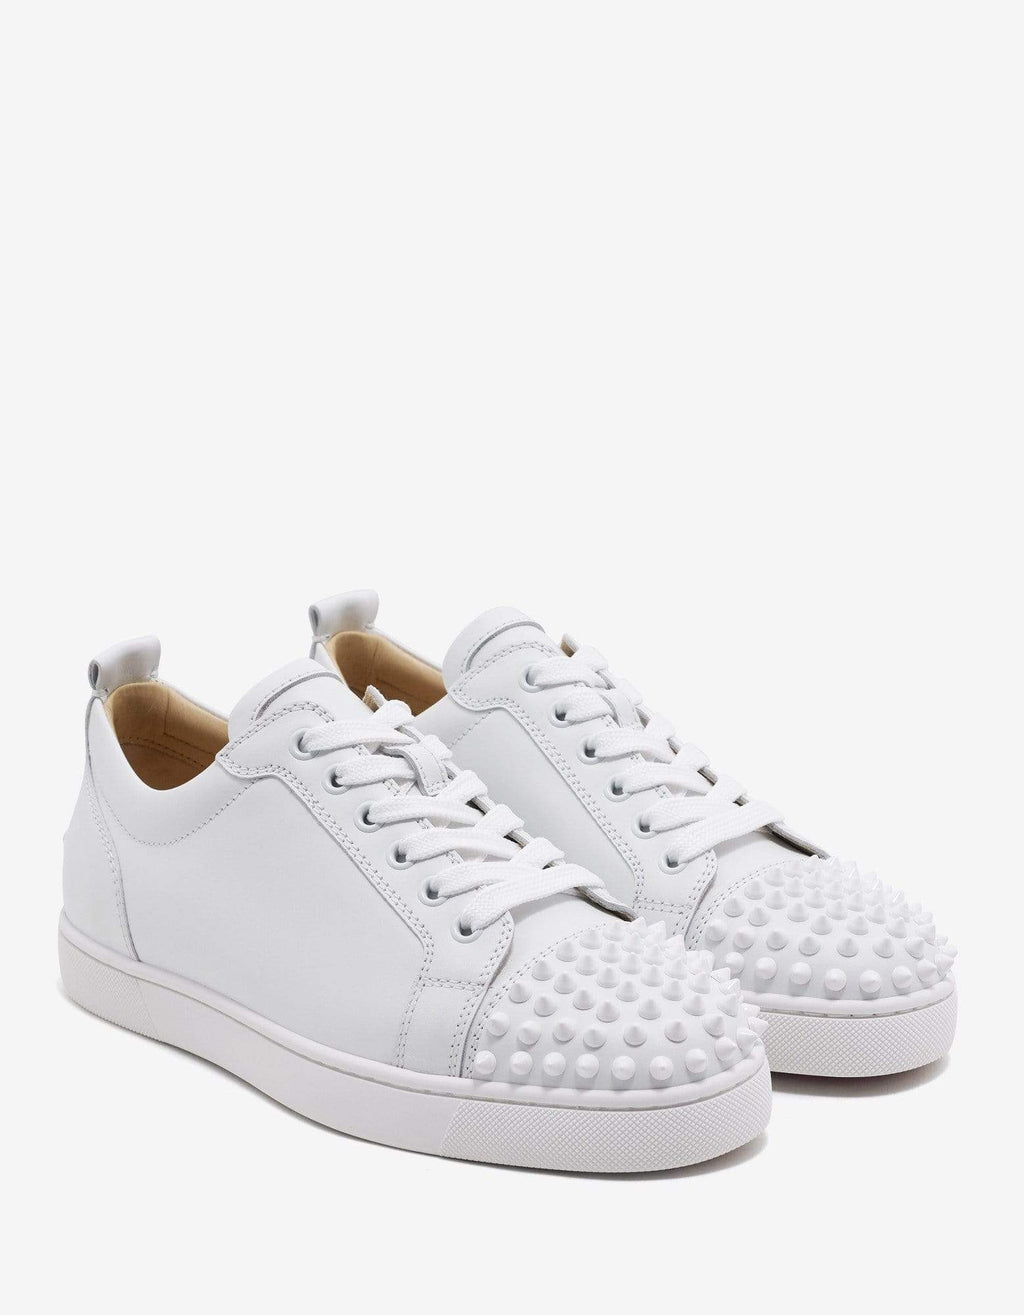 Christian Louboutin Christian Louboutin Louis Junior Spikes Flat White Leather Trainers